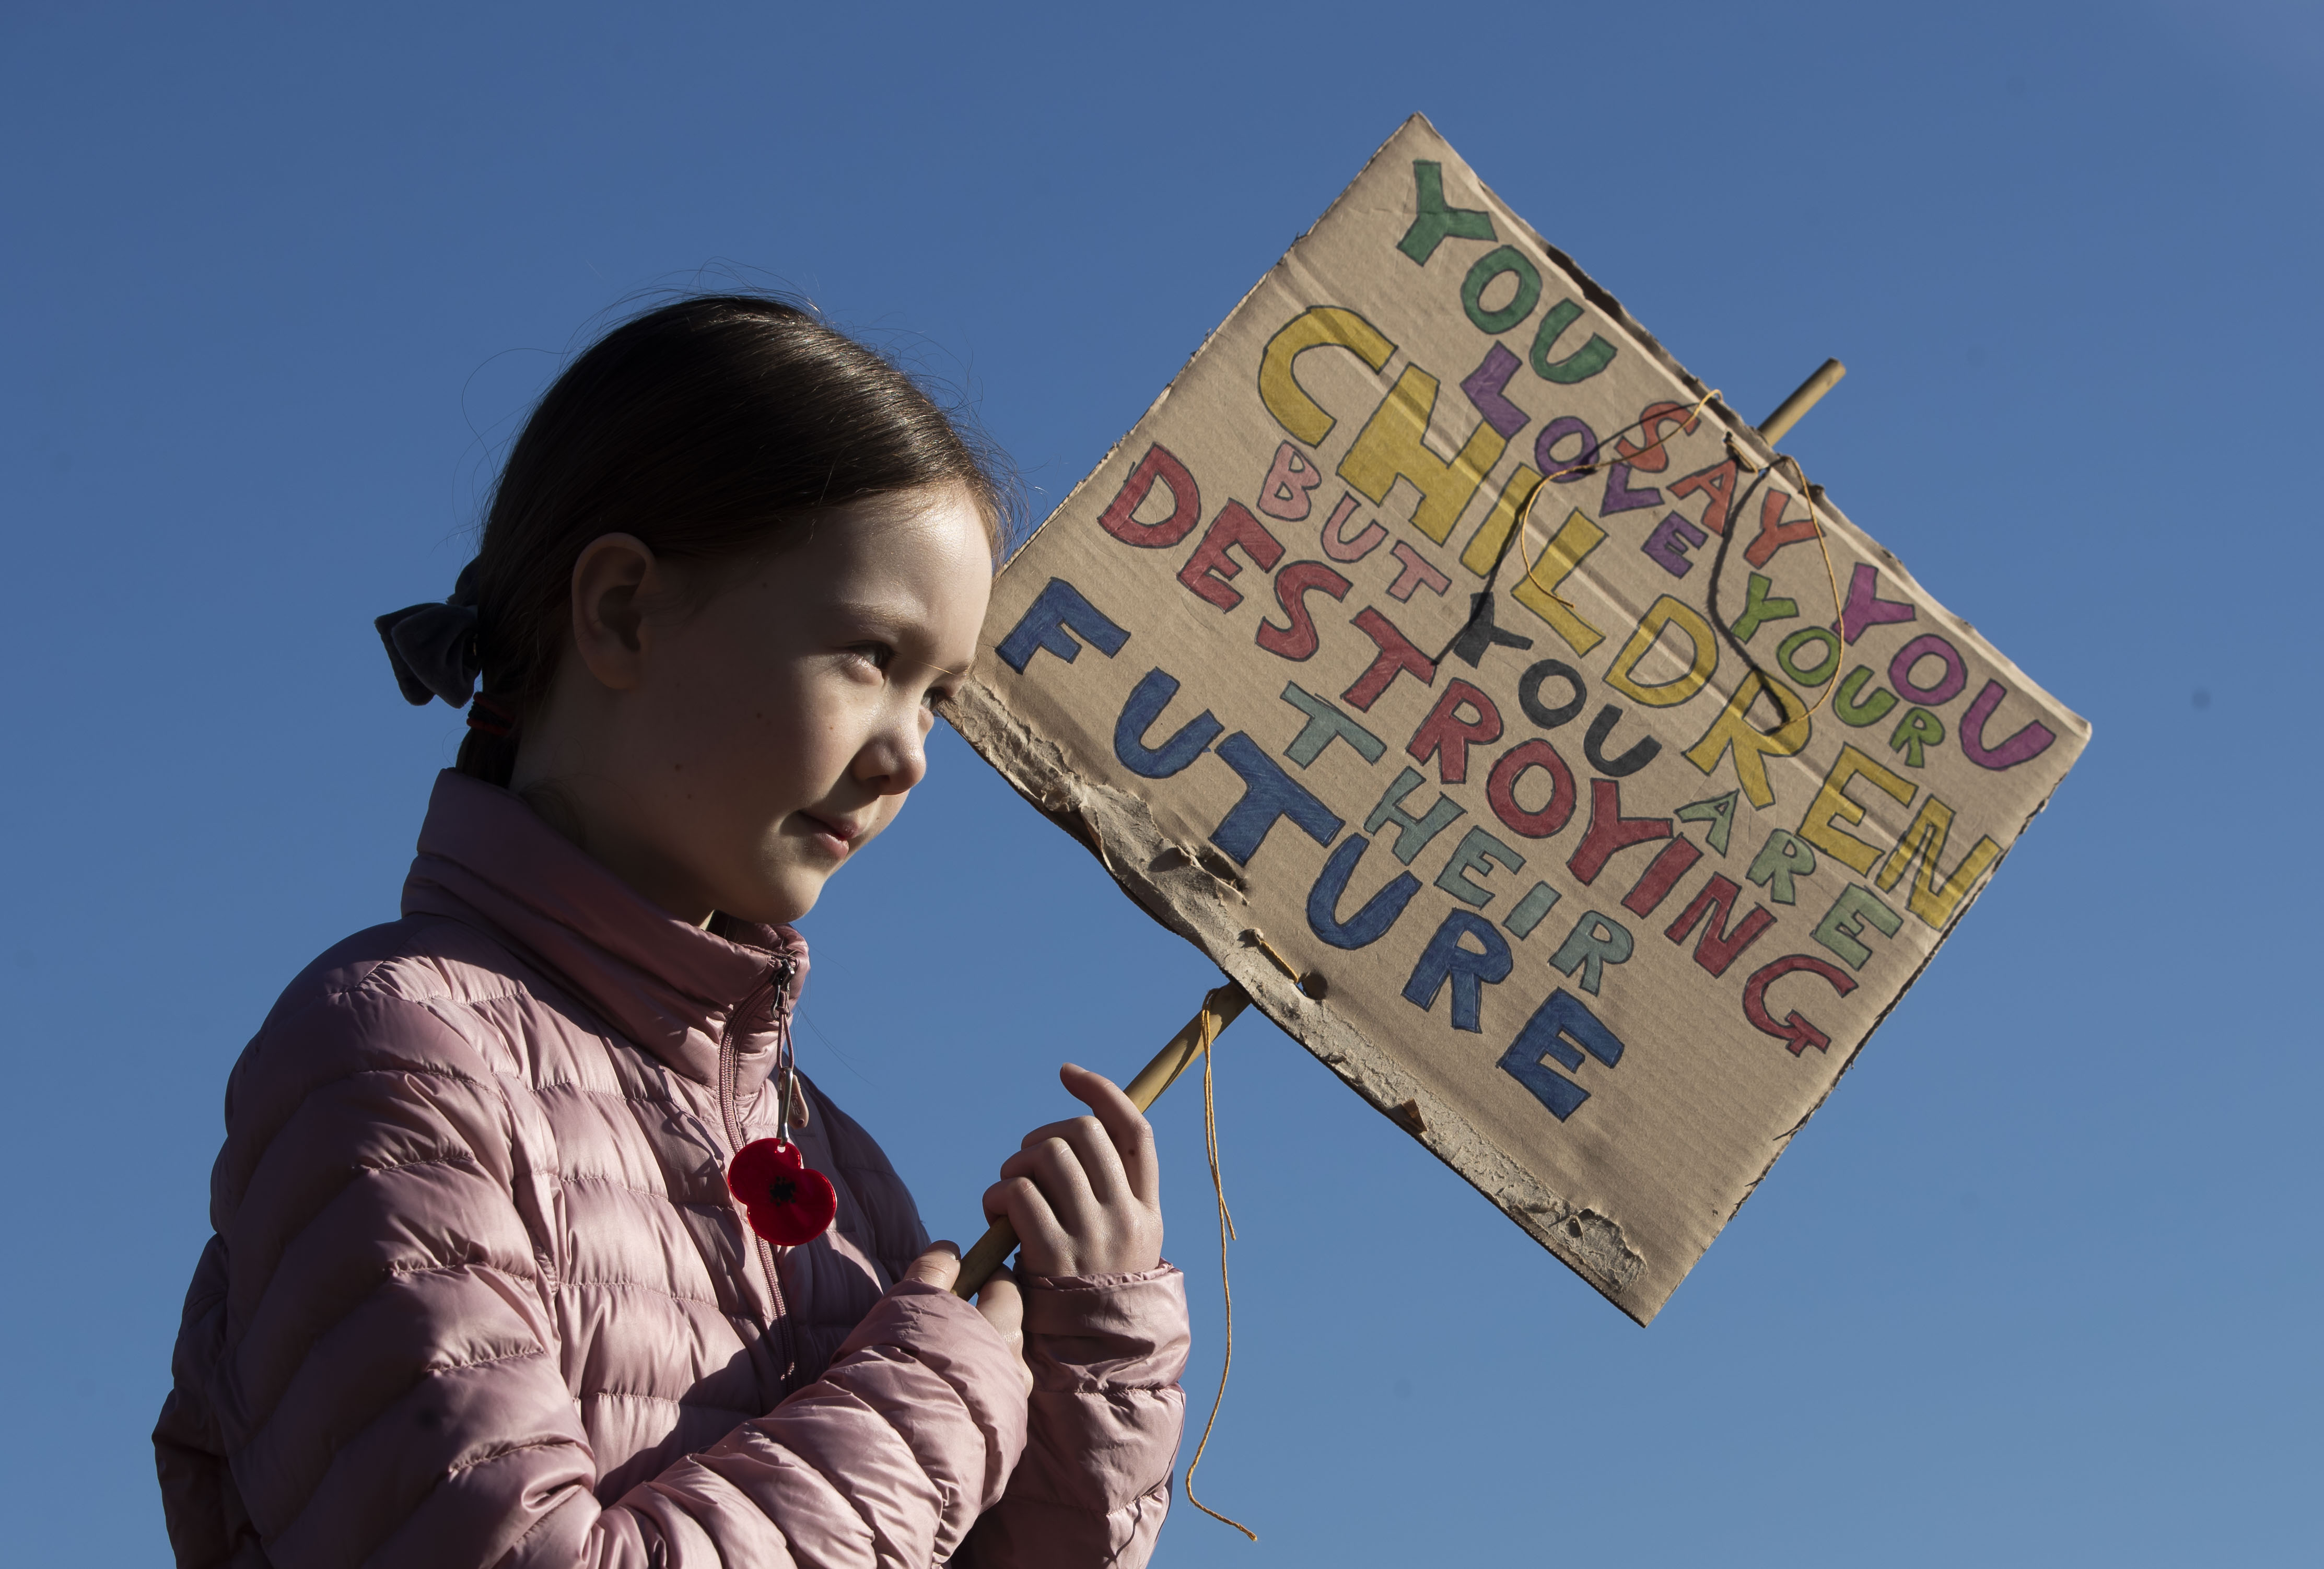 Students strike during a climate change protest in Huddersfield